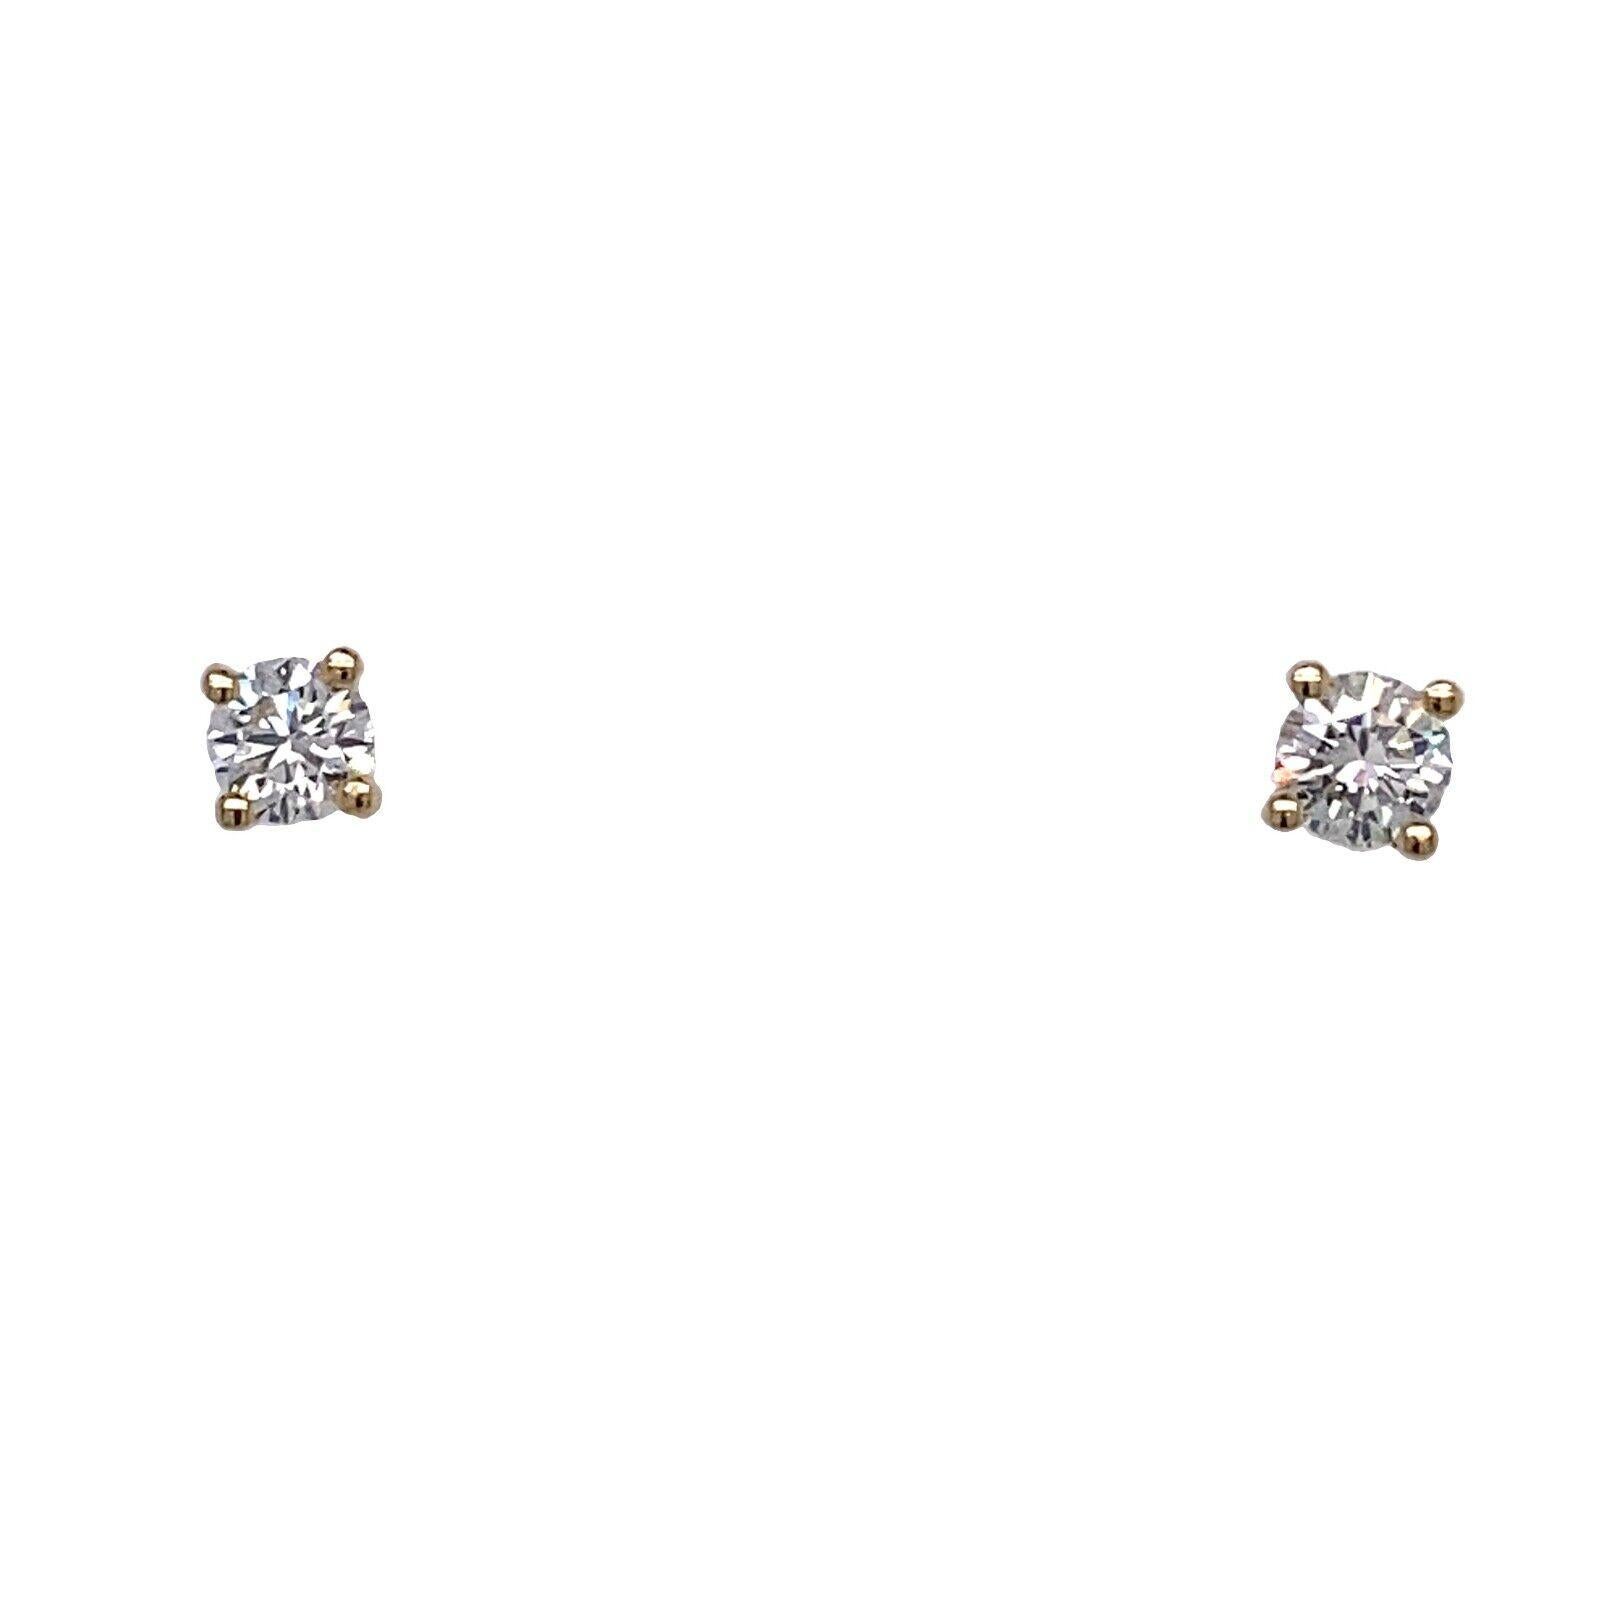 18ct Yellow Gold Solitaire Stud Earrings, Set With 0.50ct of Diamonds

This pair of 18ct Yellow Gold earrings is crafted with a total of 0.50ct round brilliant cut Diamonds. The Diamonds are set in four claw settings. This pair of earrings is a